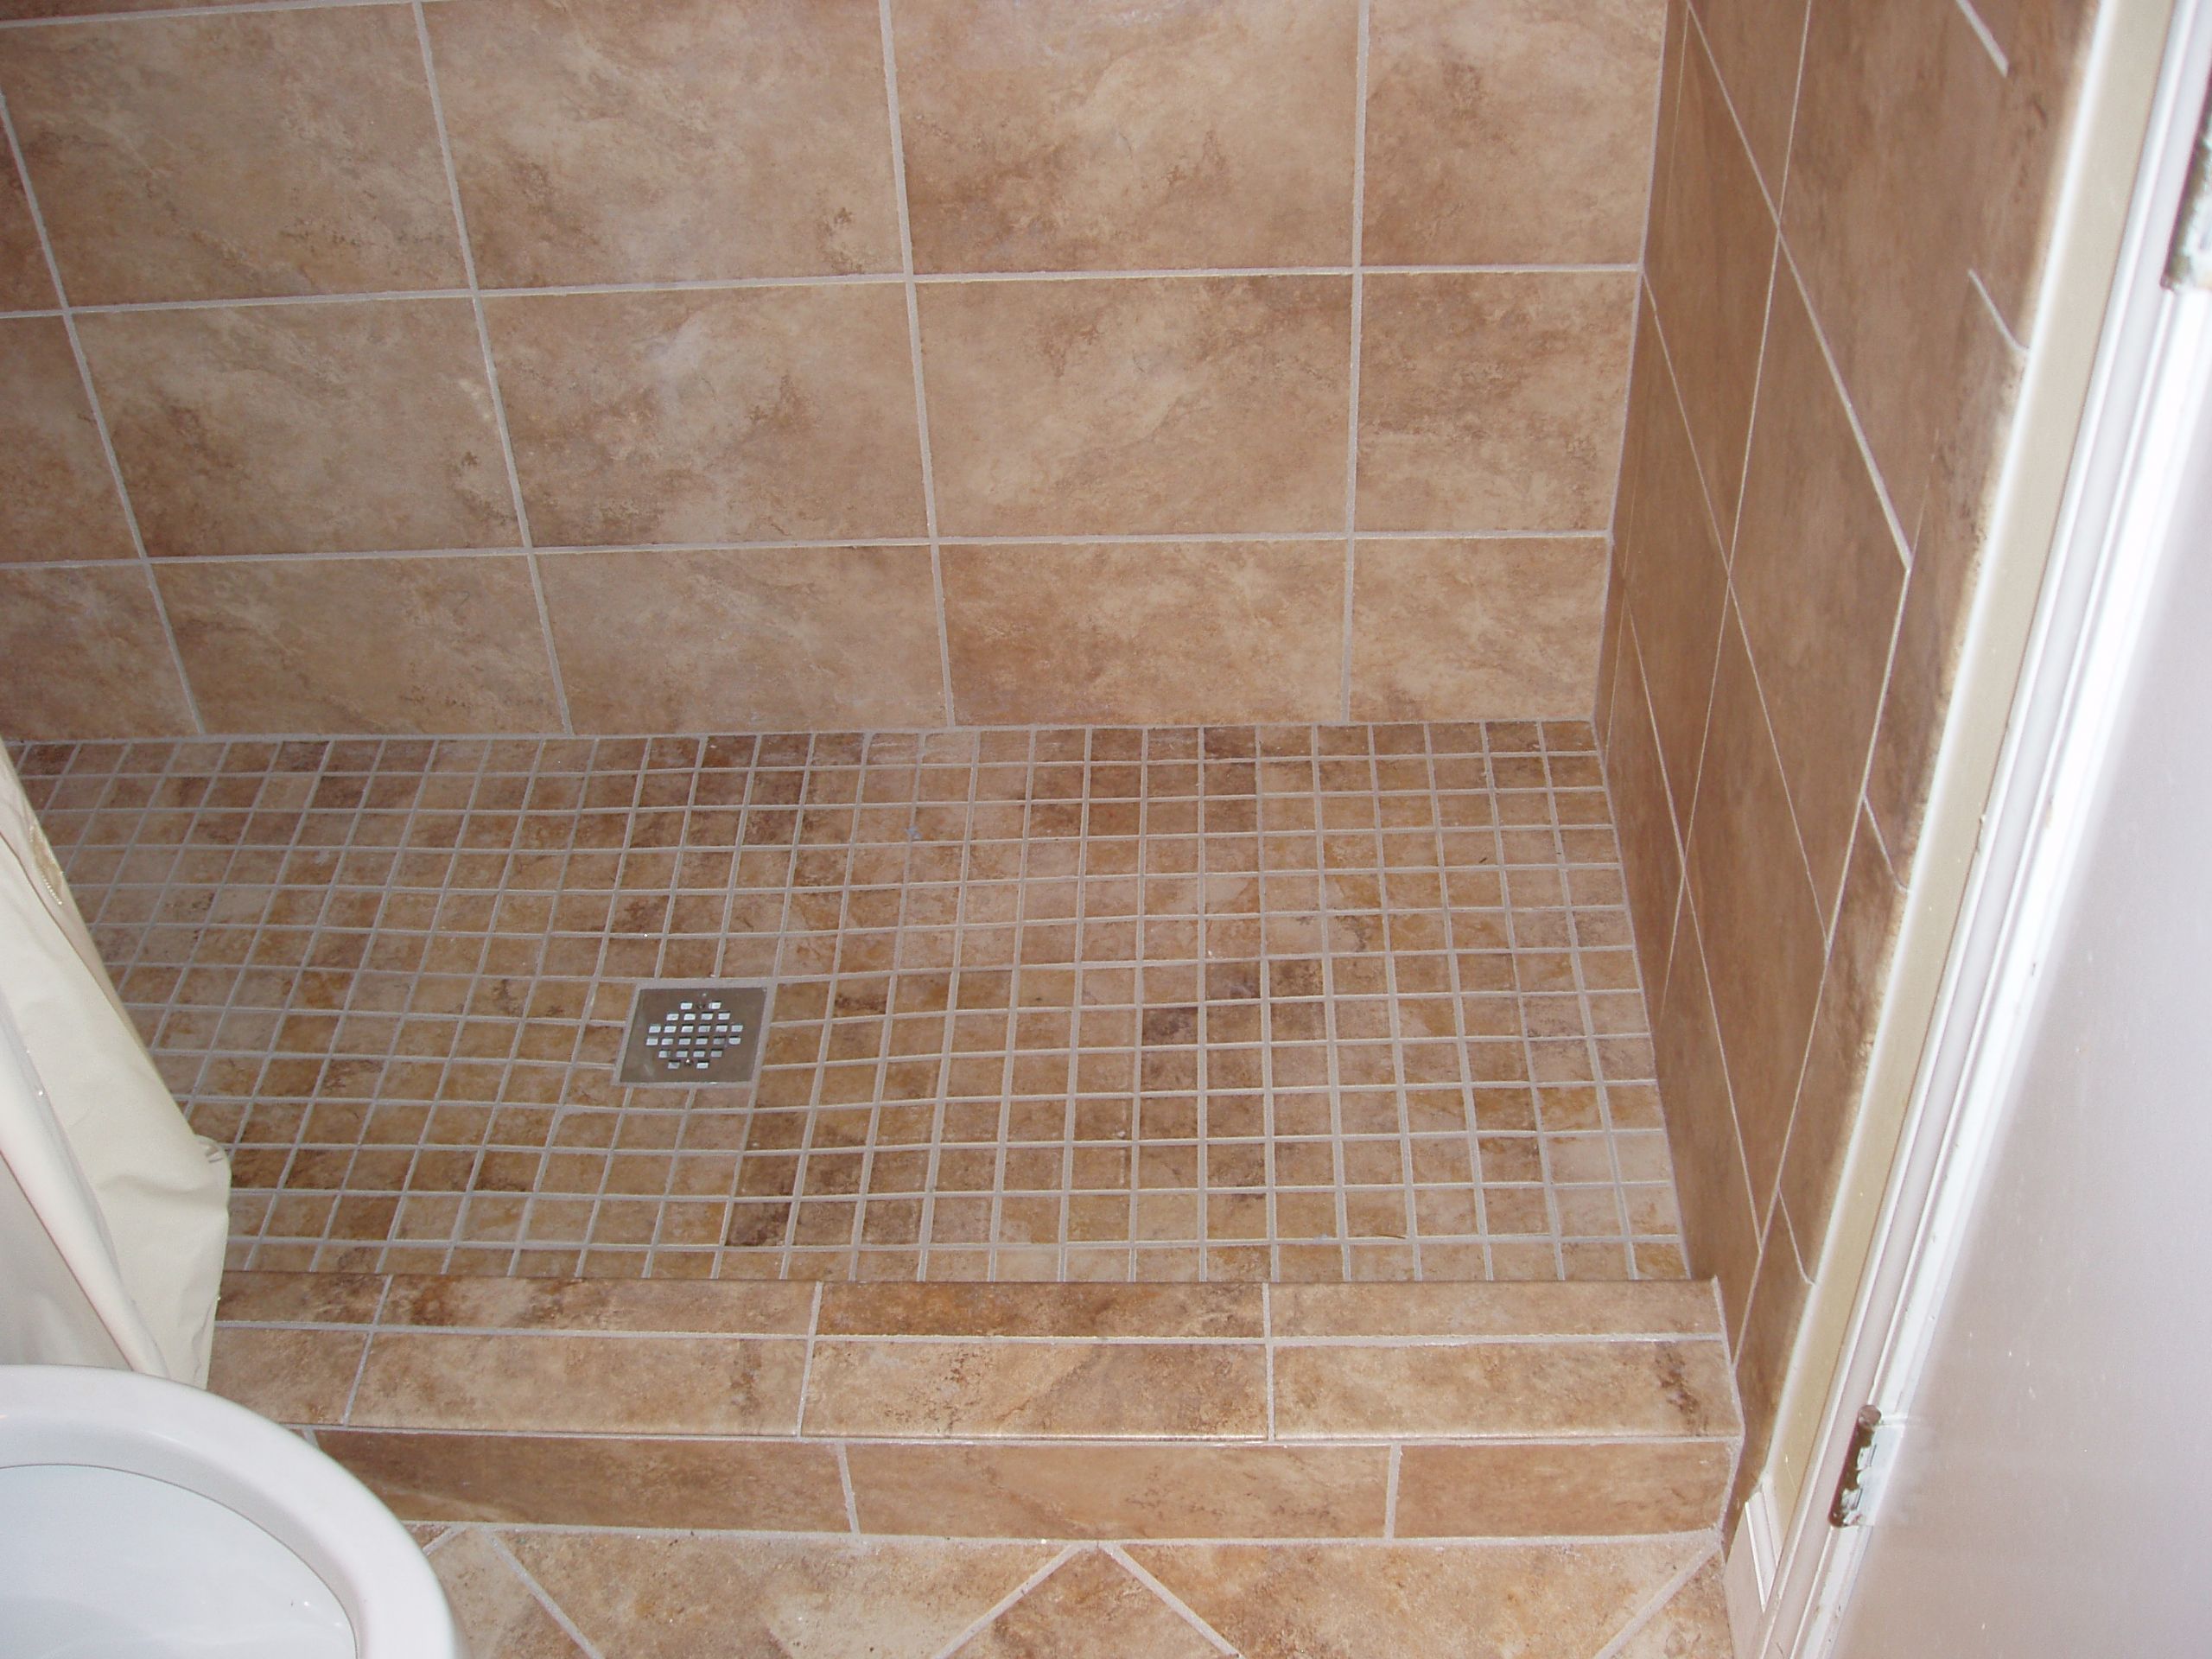 Home Depot Bathroom Shower Tile
 Dufner & Sons Contracting Gallery